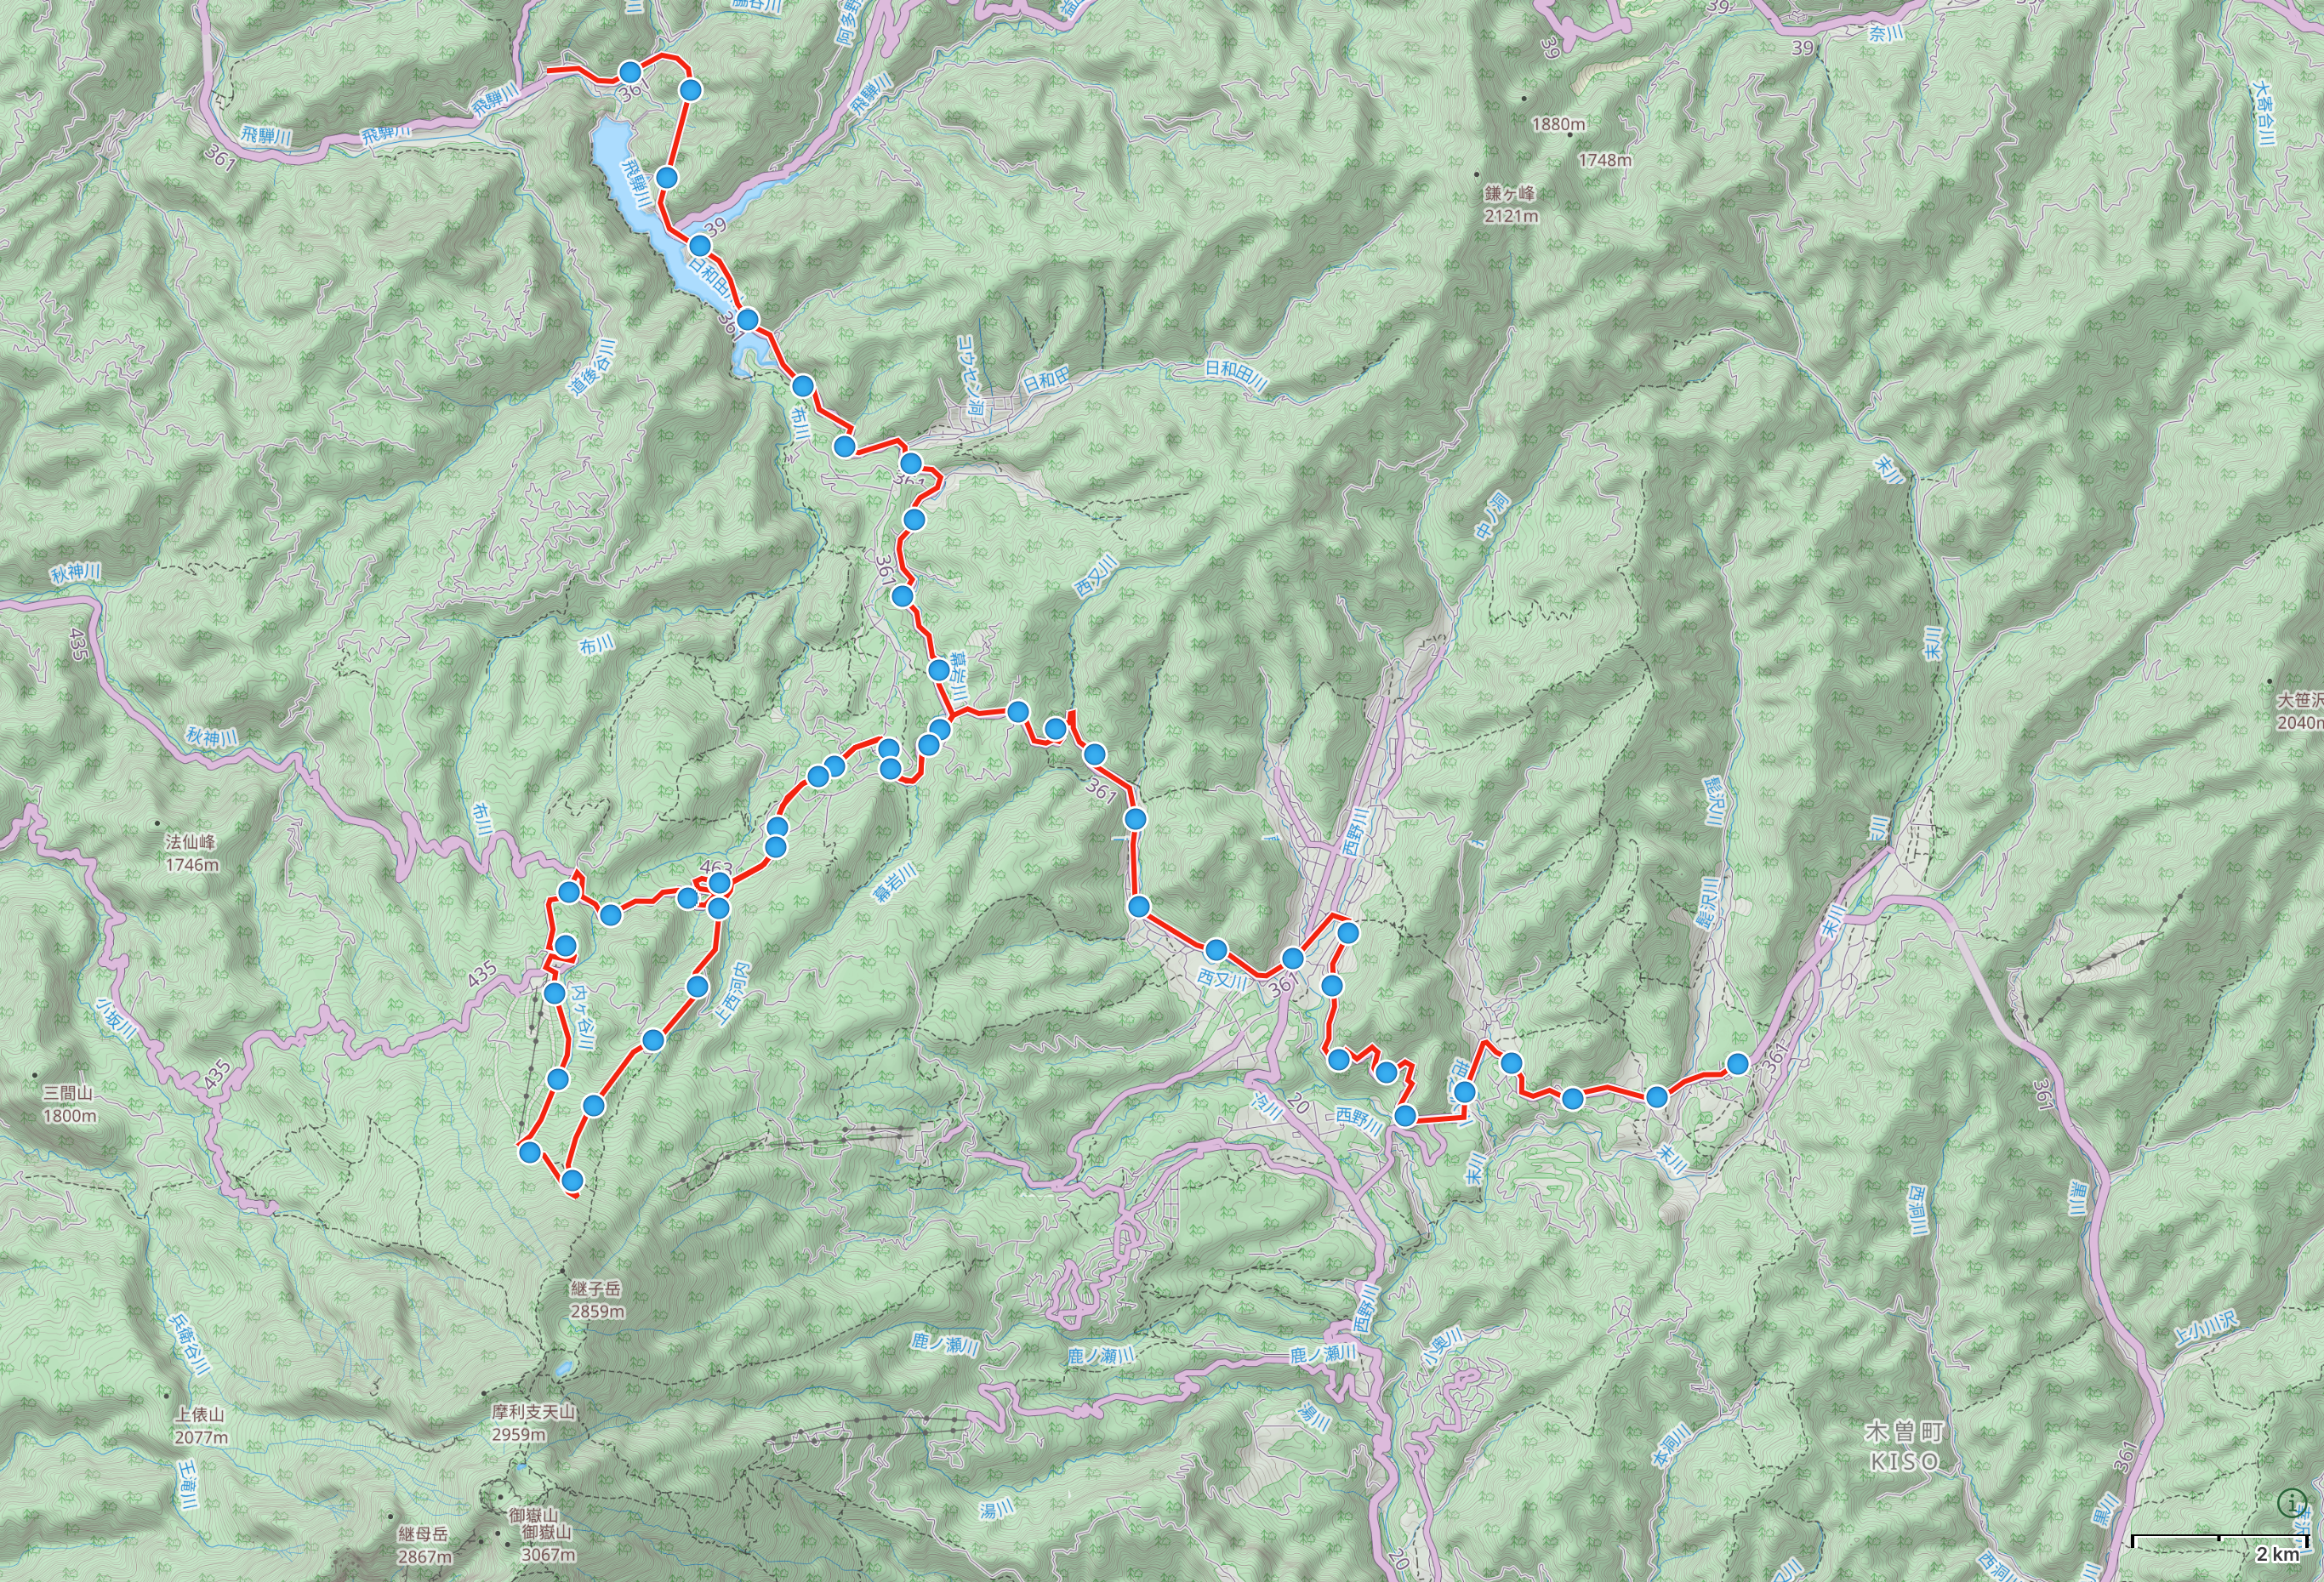 Map of Central Honshu with author’s route from Takane, Gifu to Kaida Plateau, Nagano highlighted.